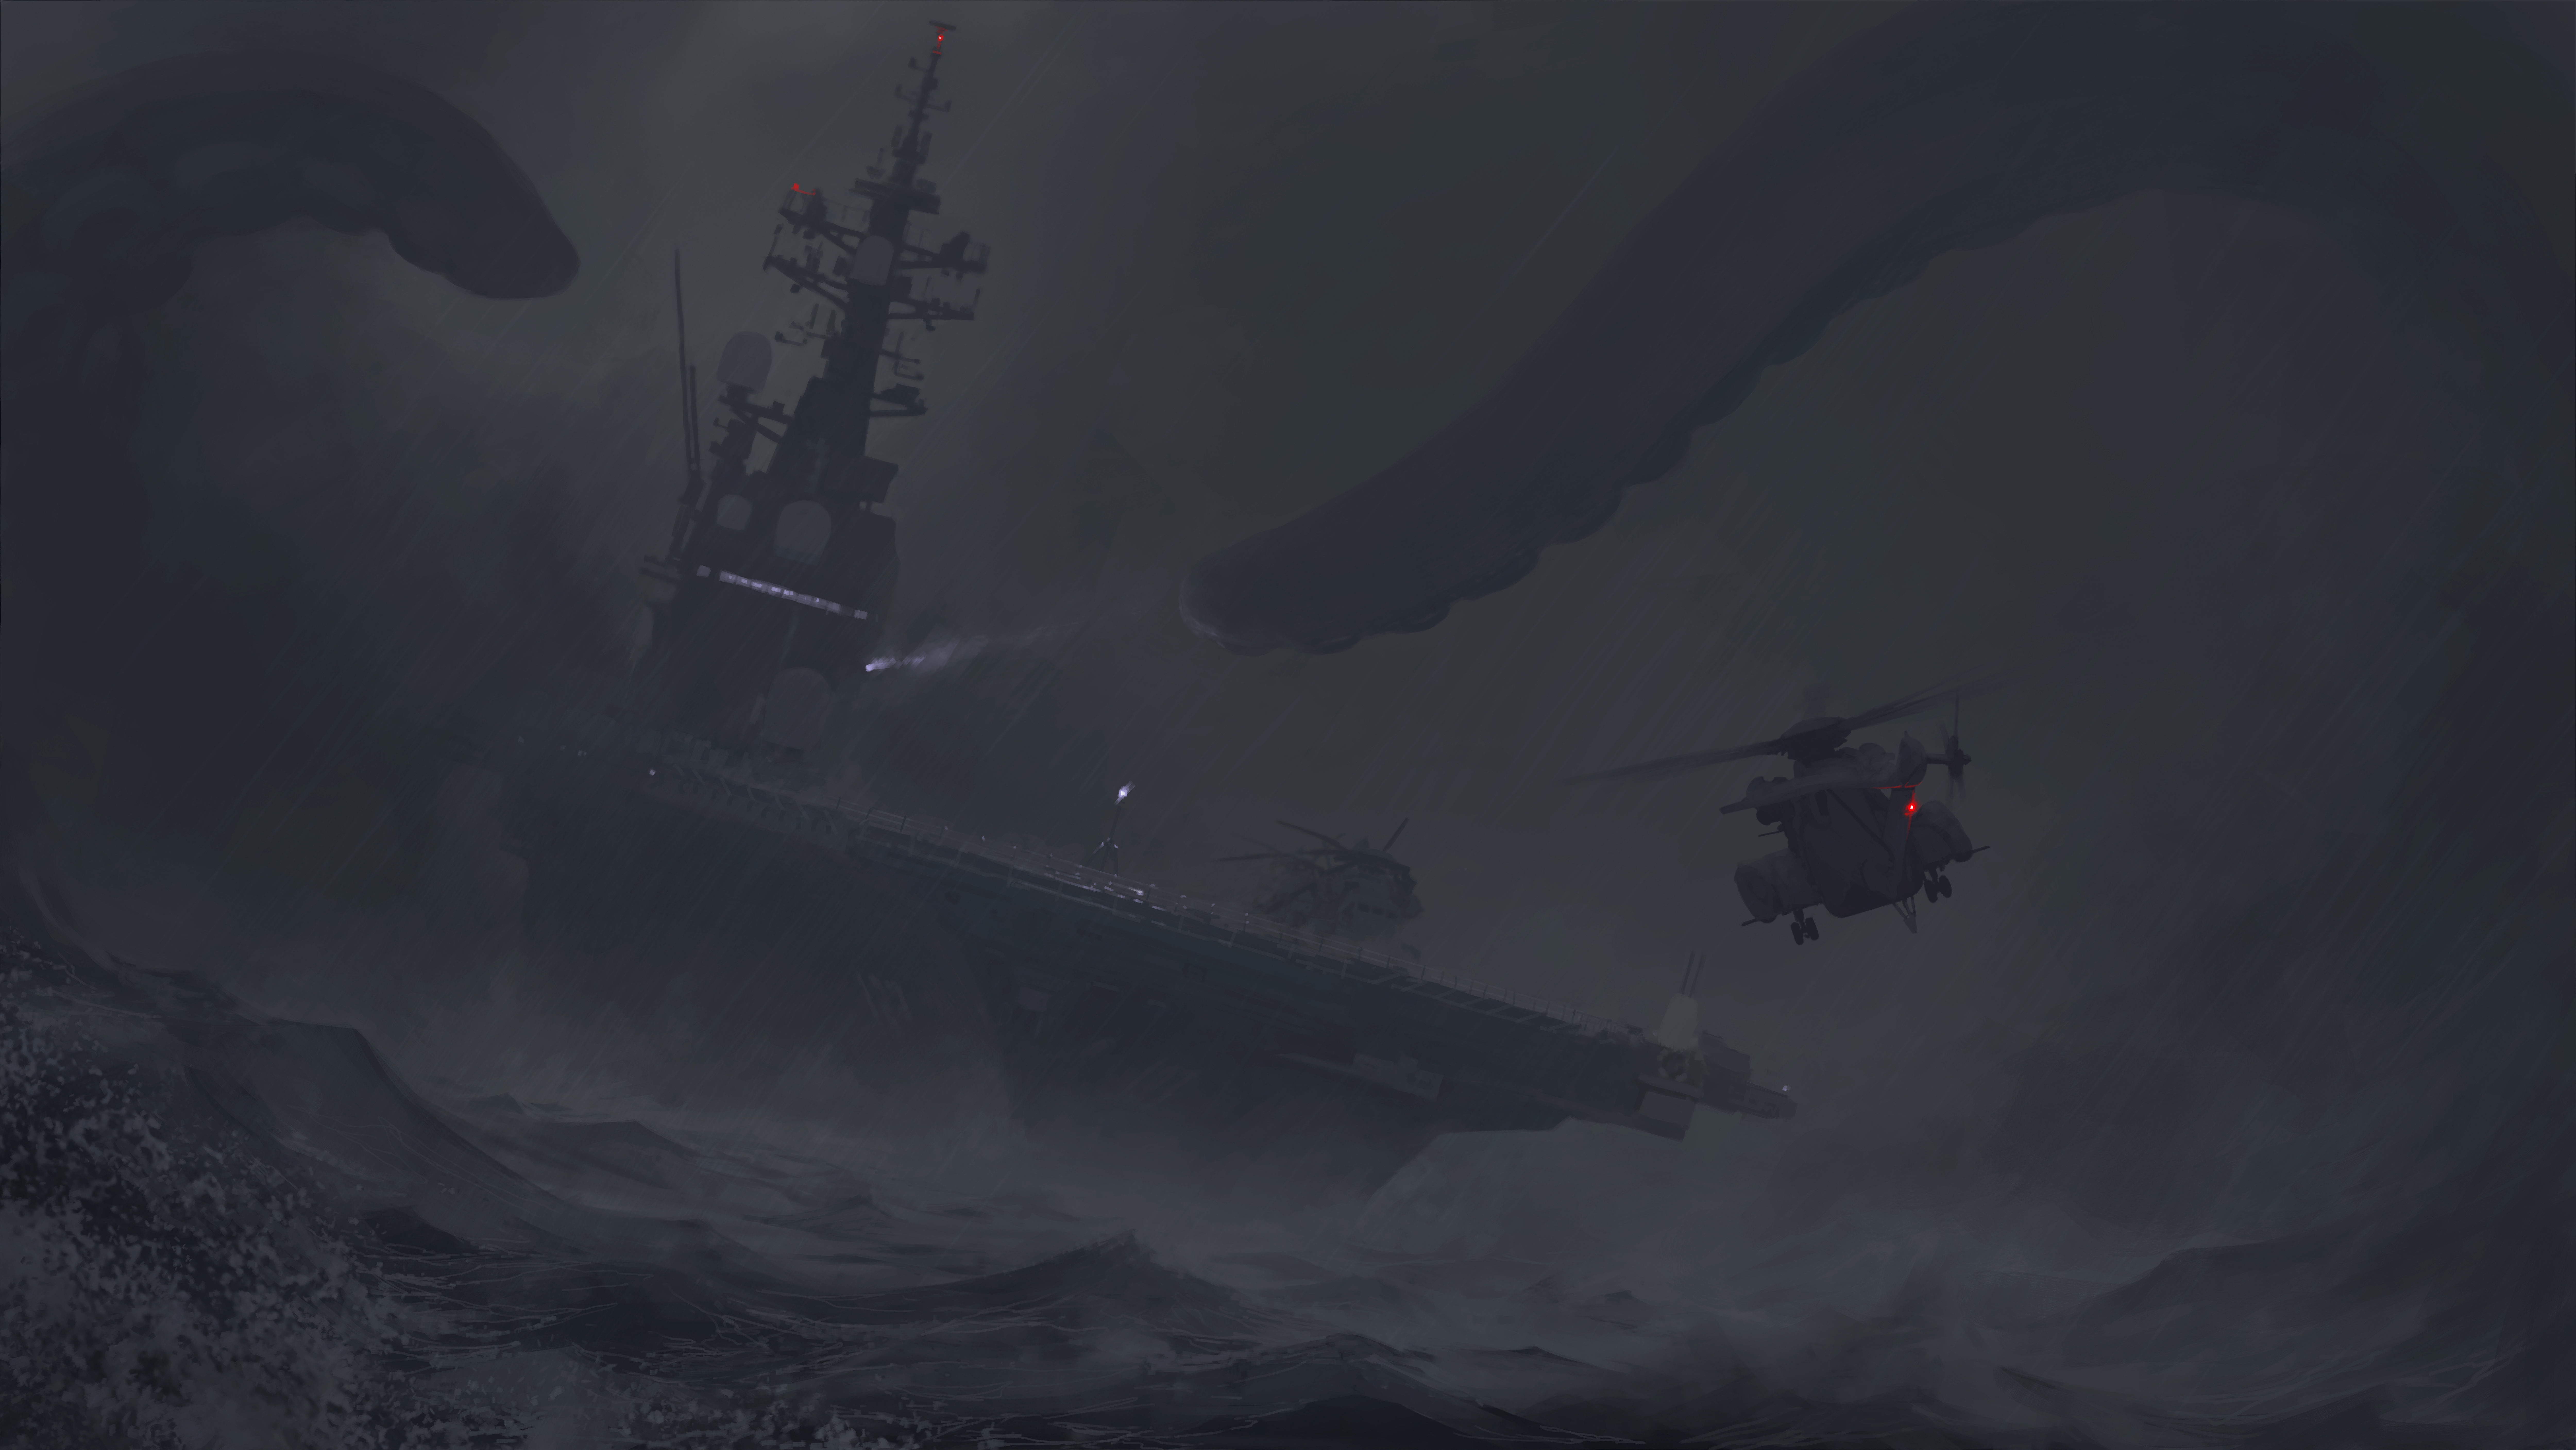 General 10000x5627 artwork digital art sea ship waves sea monsters tentacles dark helicopters storm aircraft carrier Alexey Andreev fantasy art